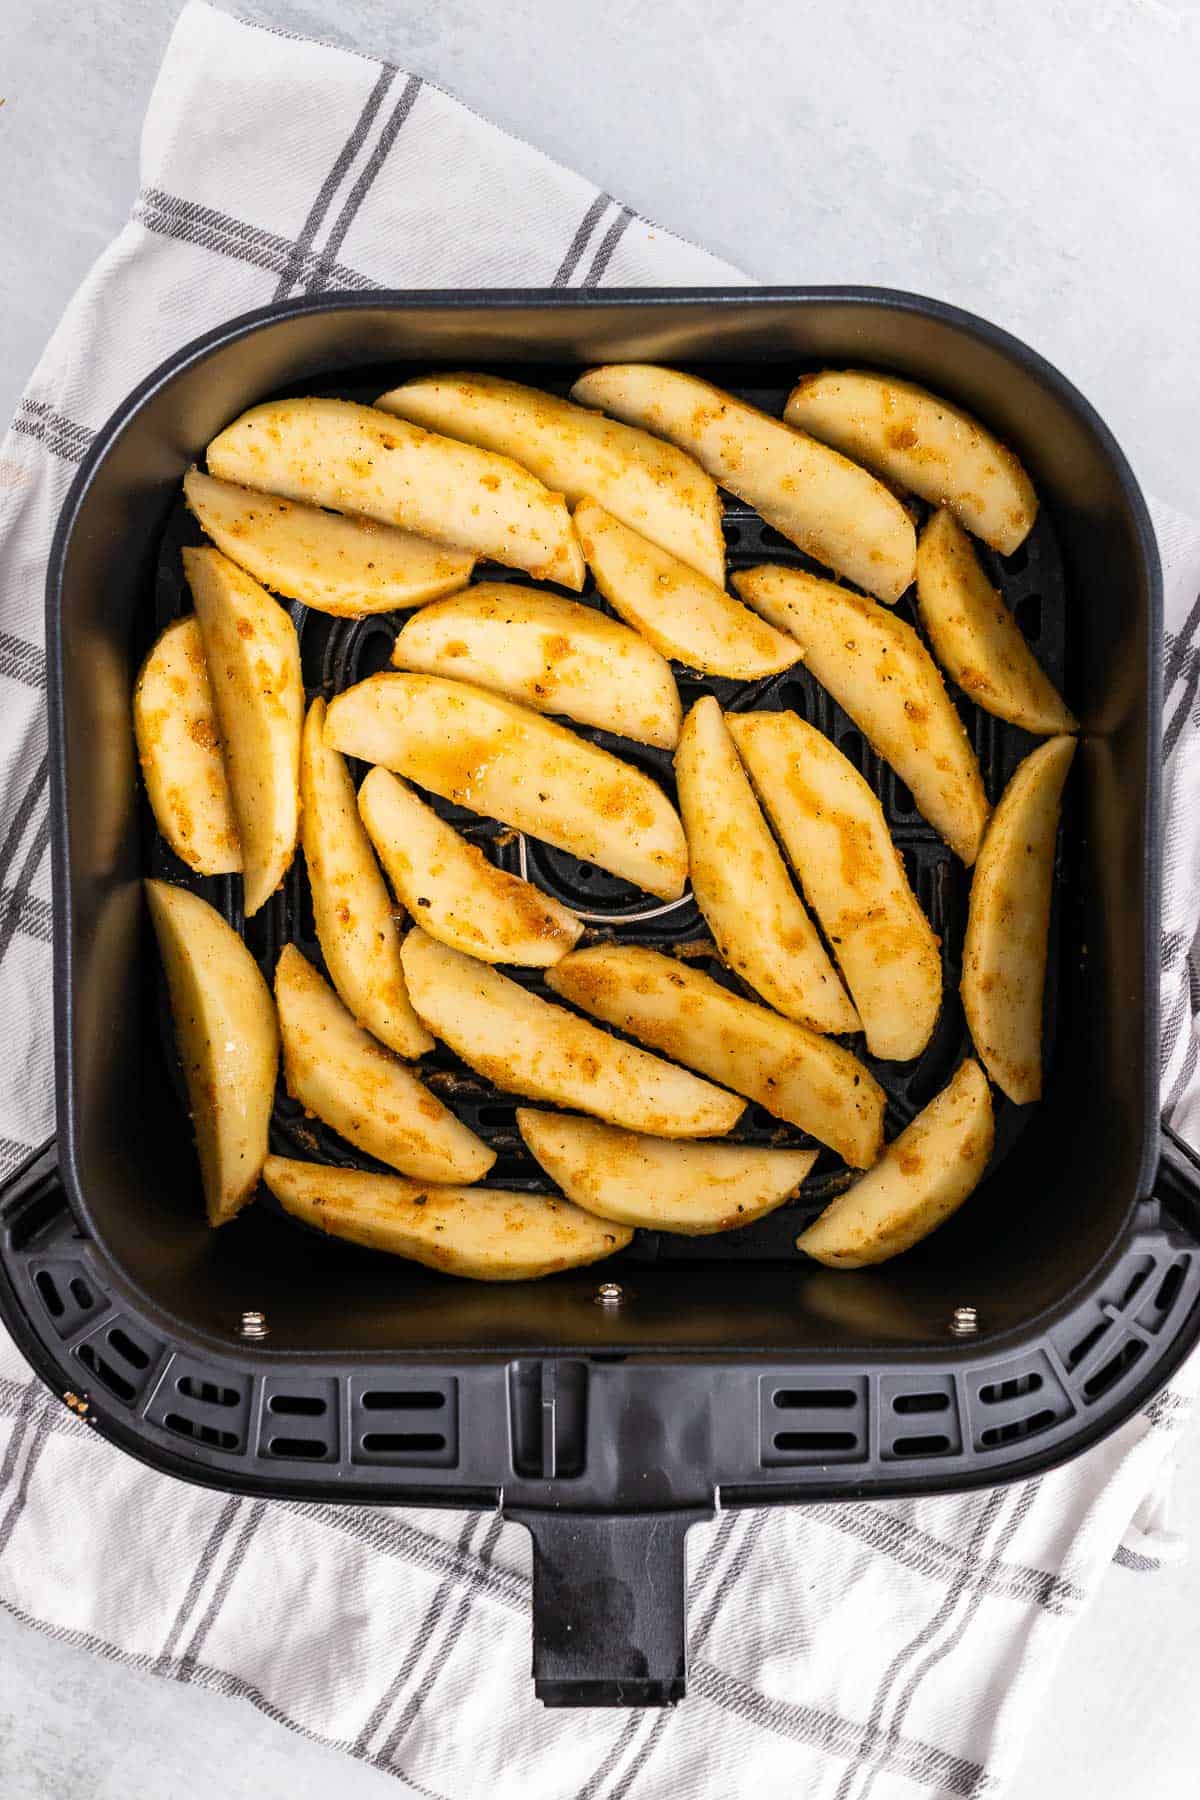 fresh cut potato wedges, tossed in olive oil, garlic powder, onion powder, salt, pepper, paprika and placed in an air fryer basket